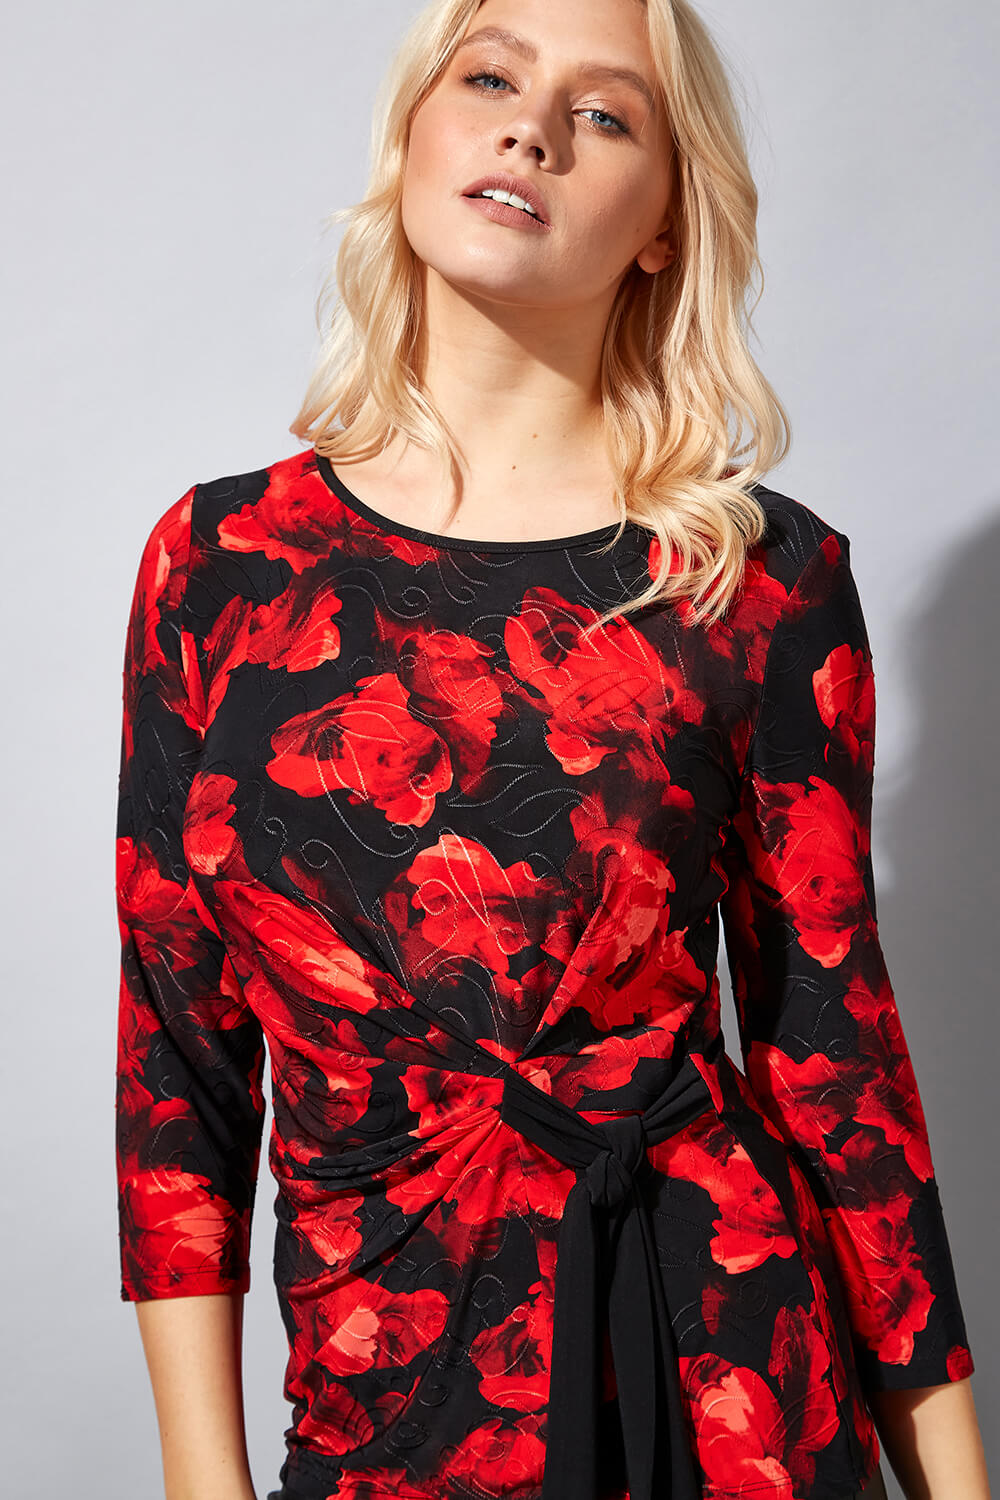 Red Jacquard Floral Side Tie Top, Image 6 of 6